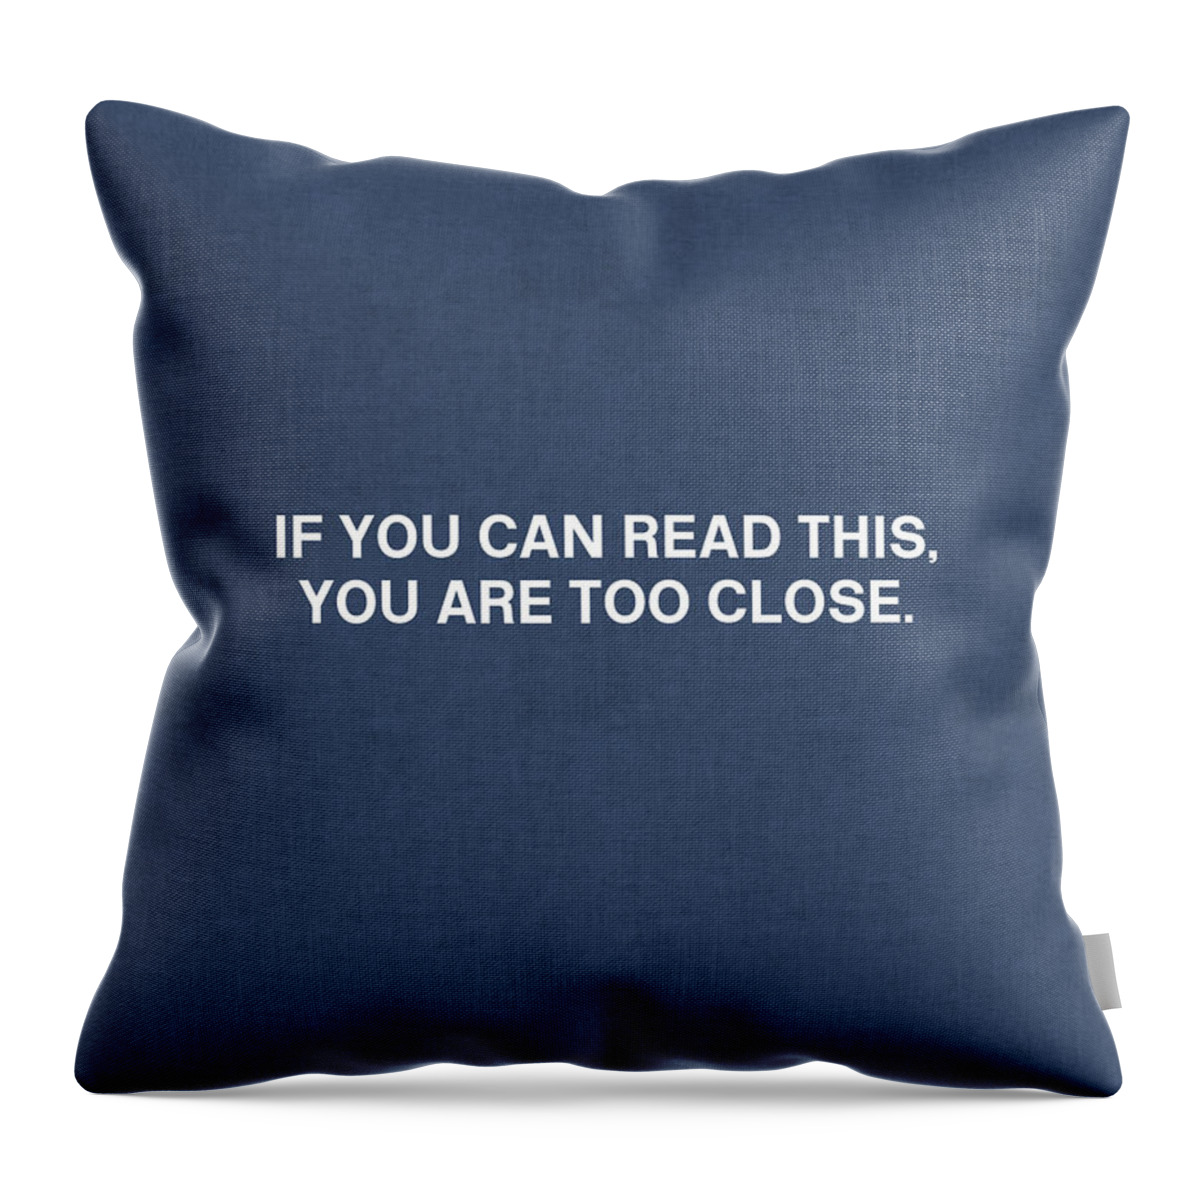 Social Distancing Throw Pillow featuring the mixed media If You Can Read This You Are Too Close- Art by Linda Woods by Linda Woods